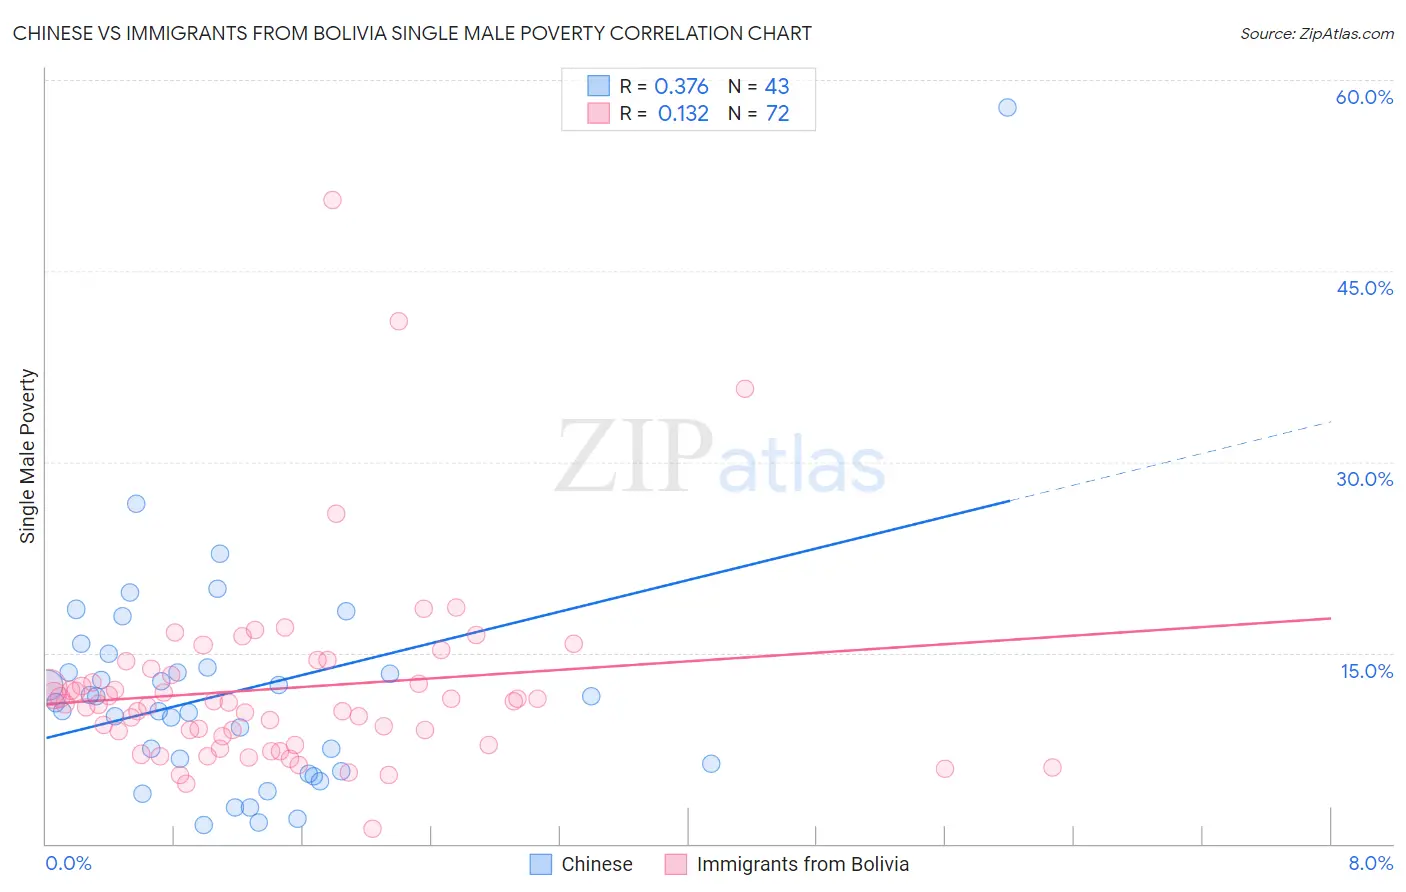 Chinese vs Immigrants from Bolivia Single Male Poverty